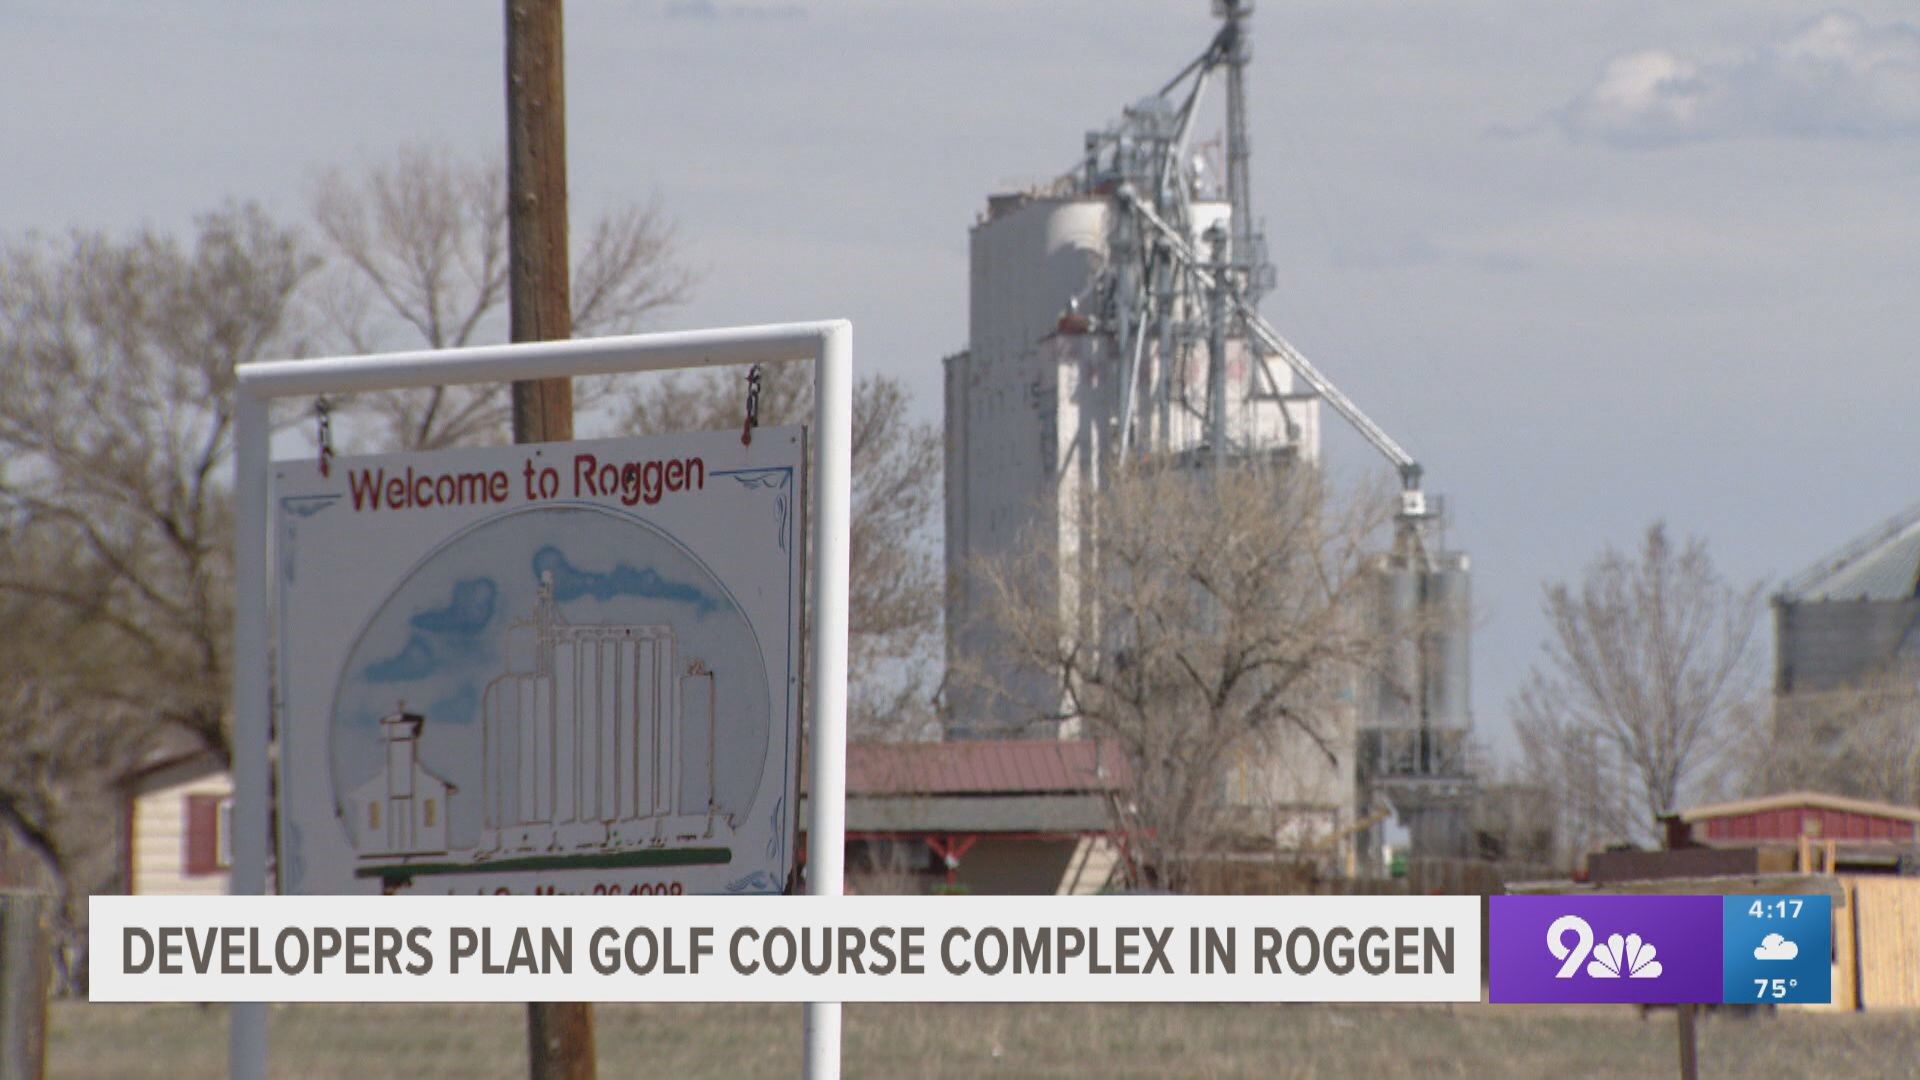 A new golf project on the plains east of Denver was announced by its developers Tuesday.